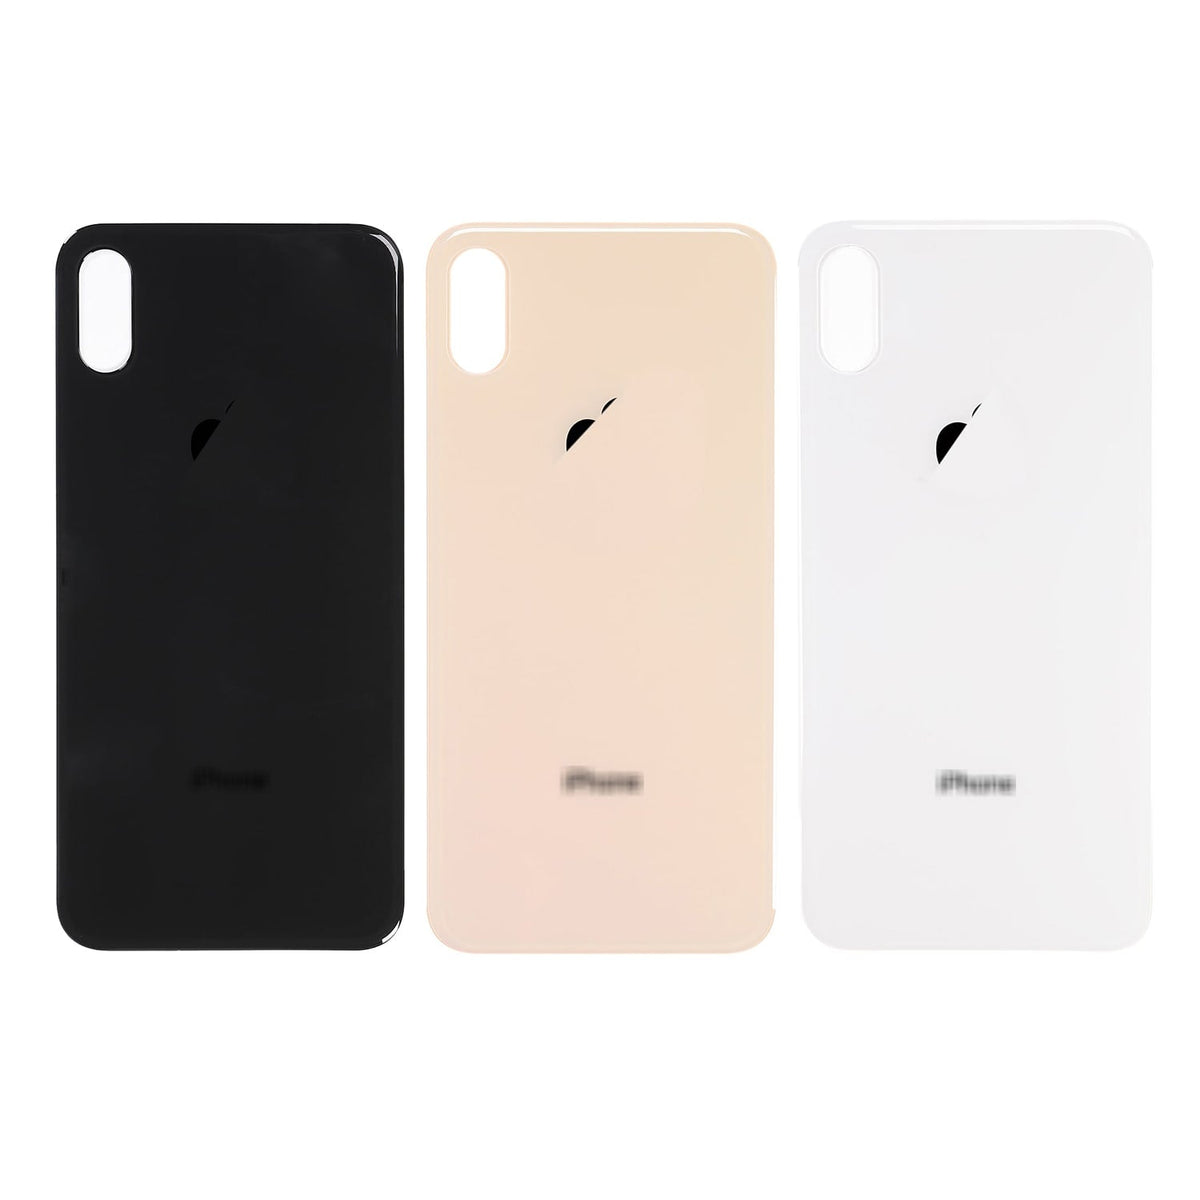 BACK COVER GLASS FOR IPHONE XS MAX